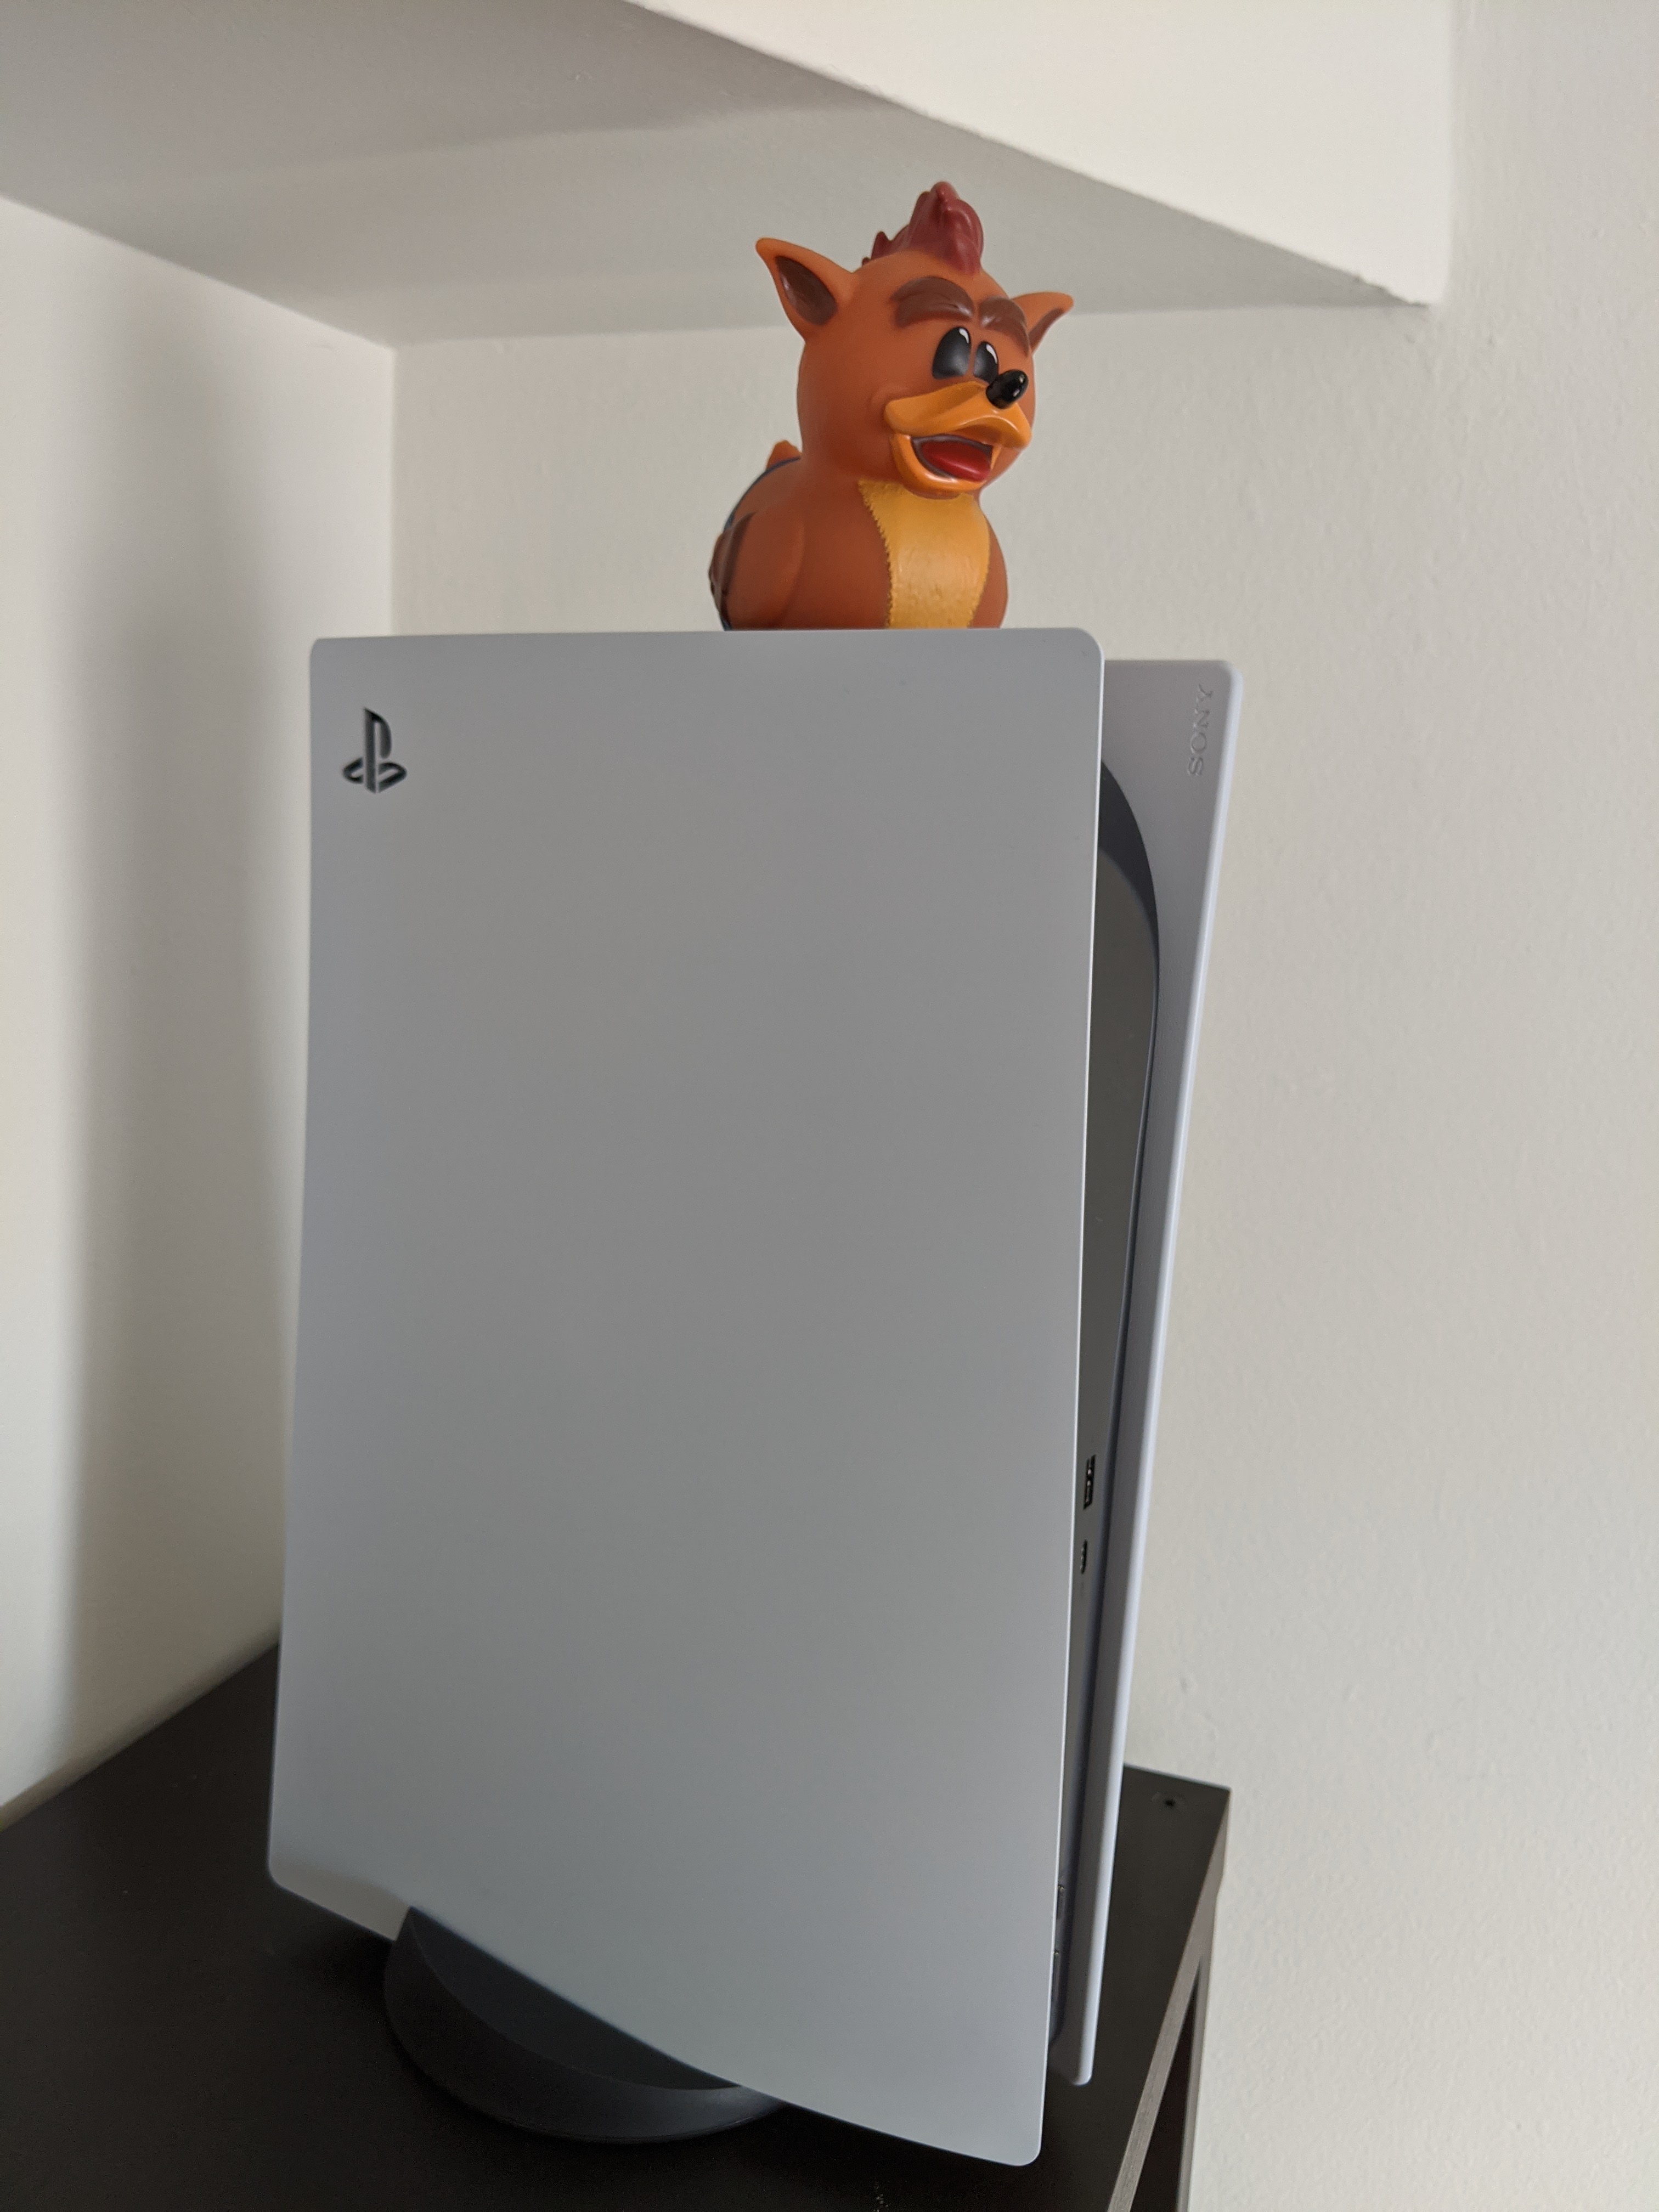 PS5 Next to a Crash Bandicoot Cosplaying Duck